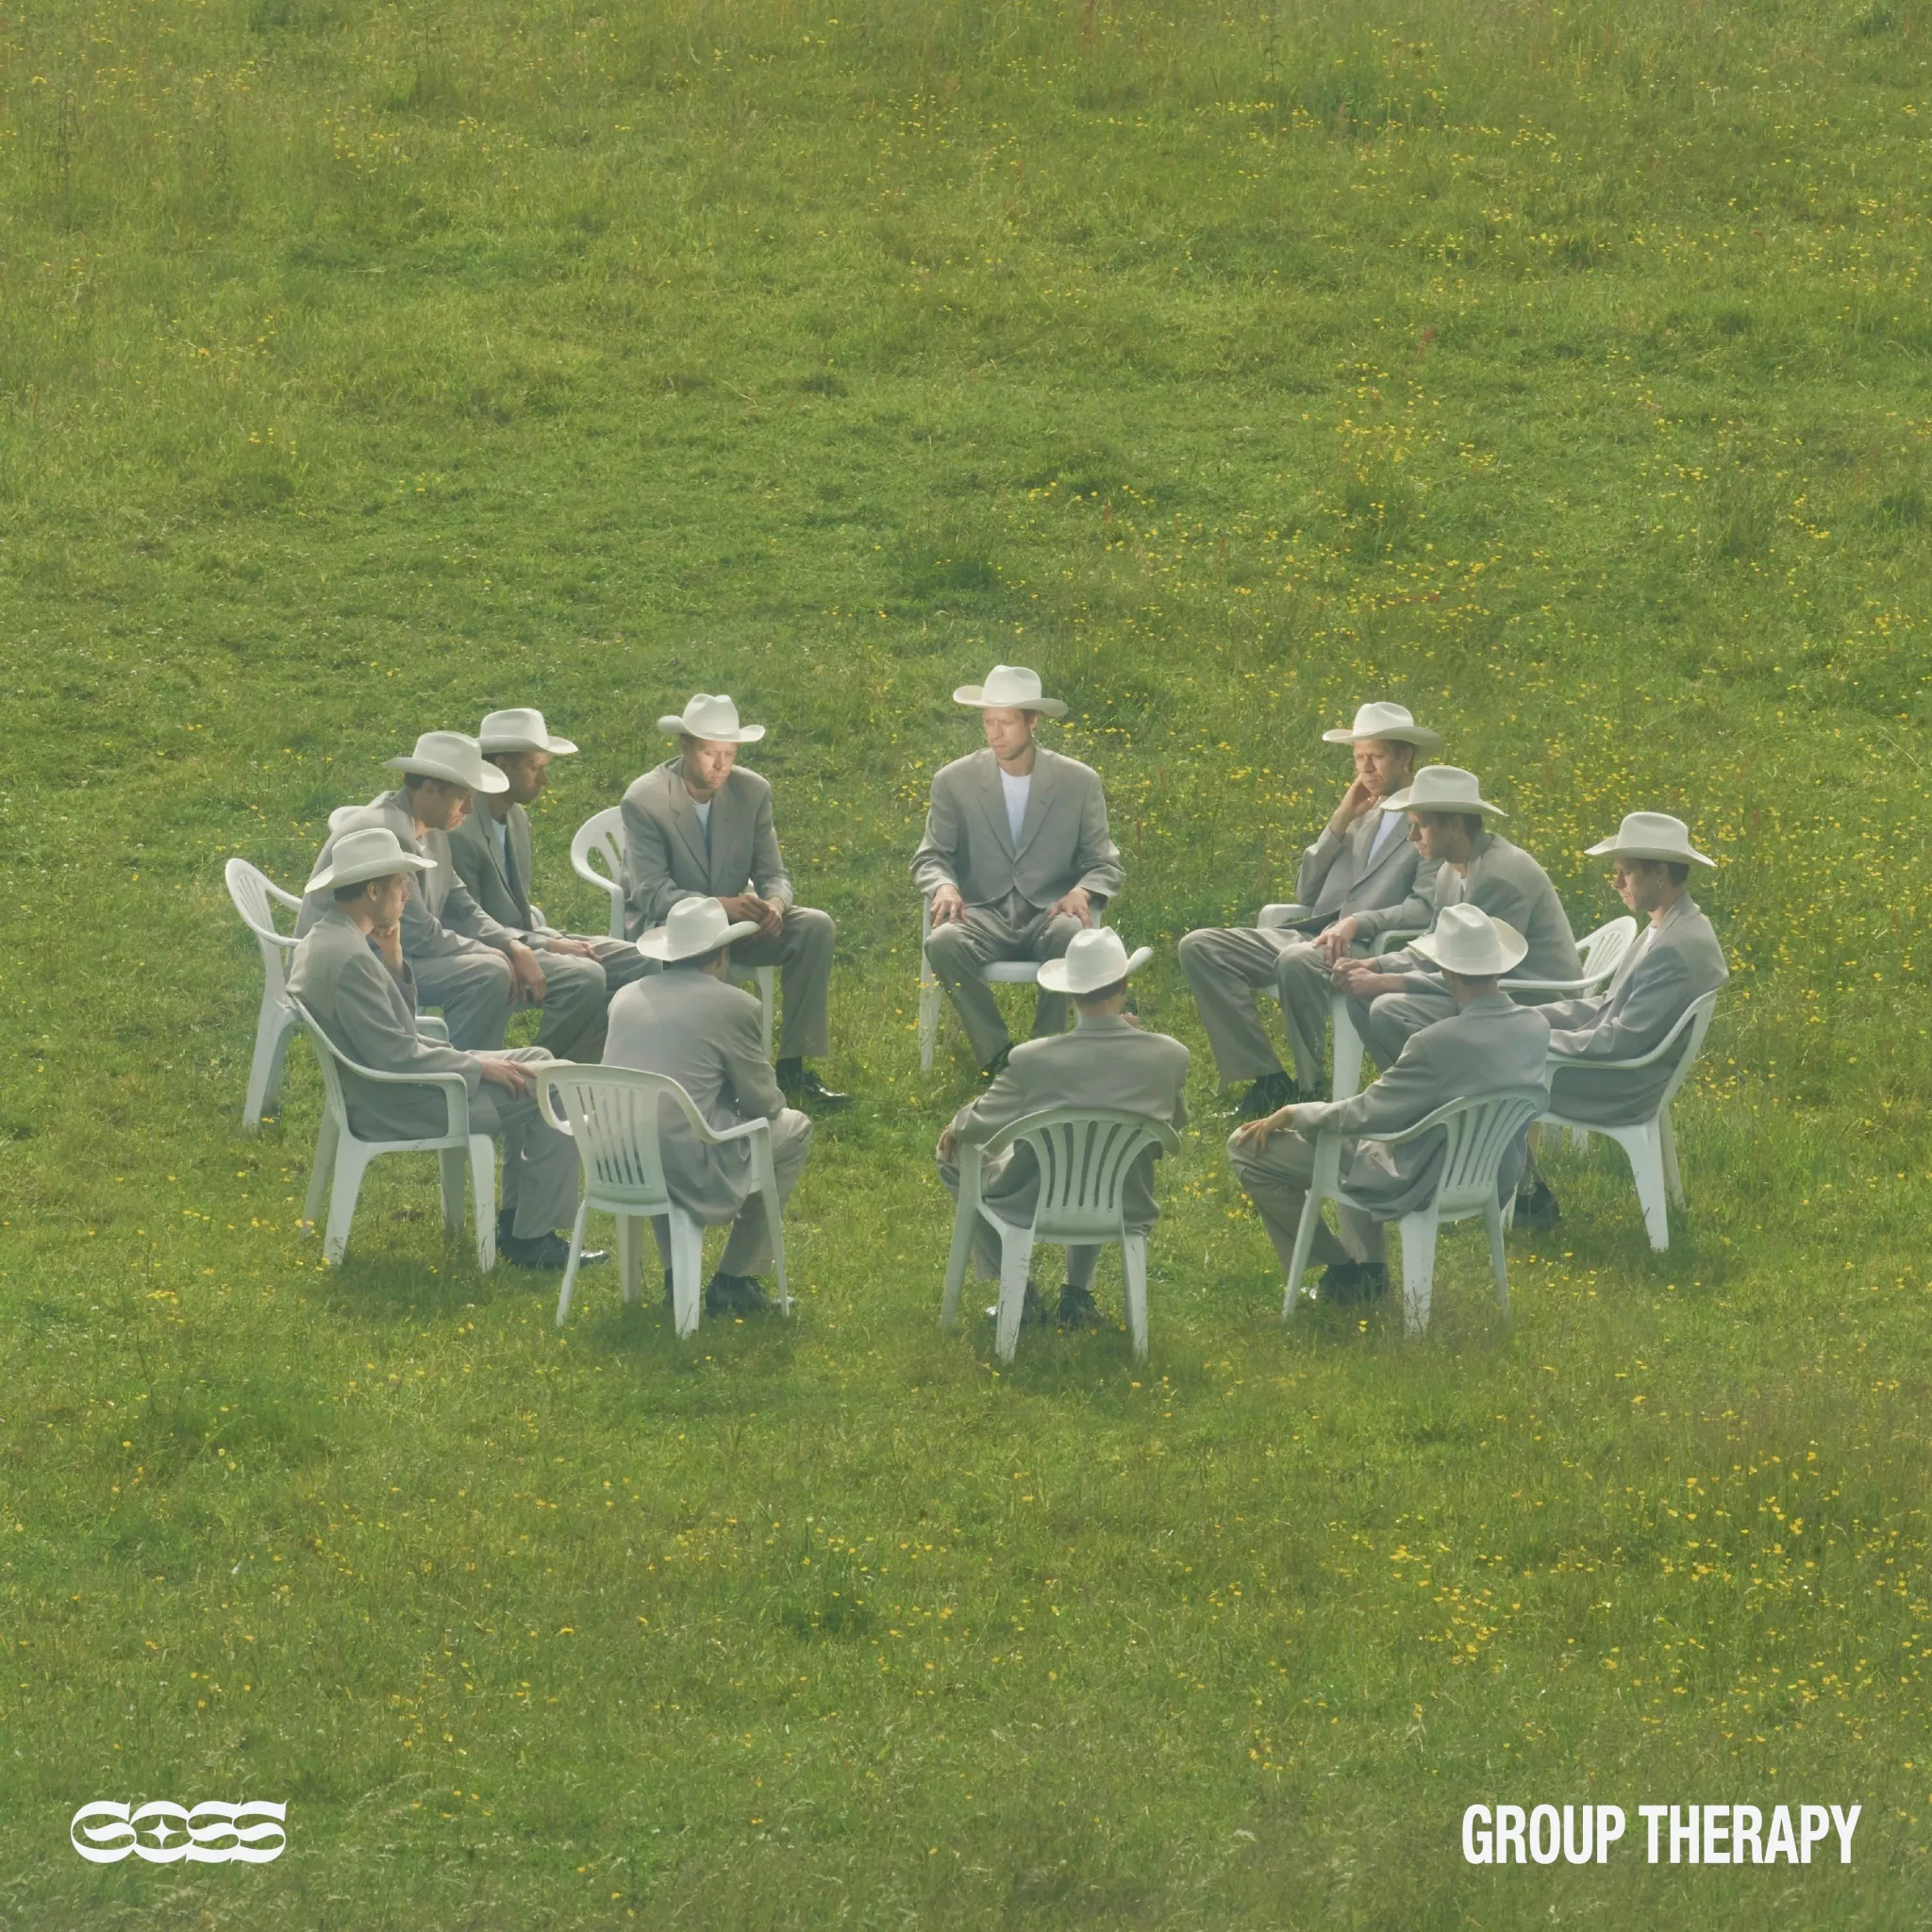 Group Therapy - Goss